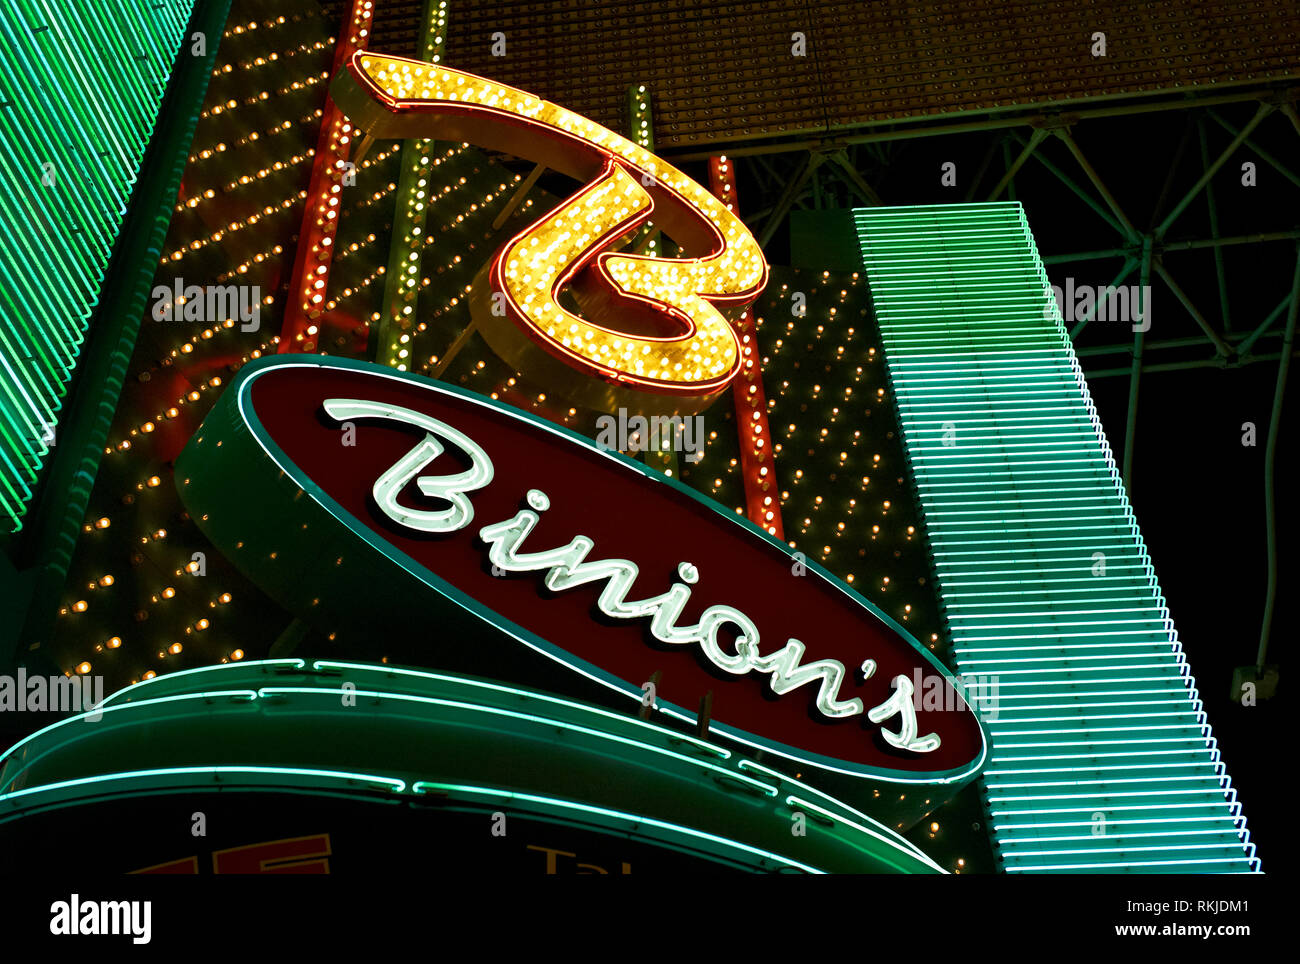 Las Vegas, Nevada - July 06 2009: The neon sign illuminated above the entrance of Binion's Horseshoe Casino in the world famous Freemont Street. Stock Photo